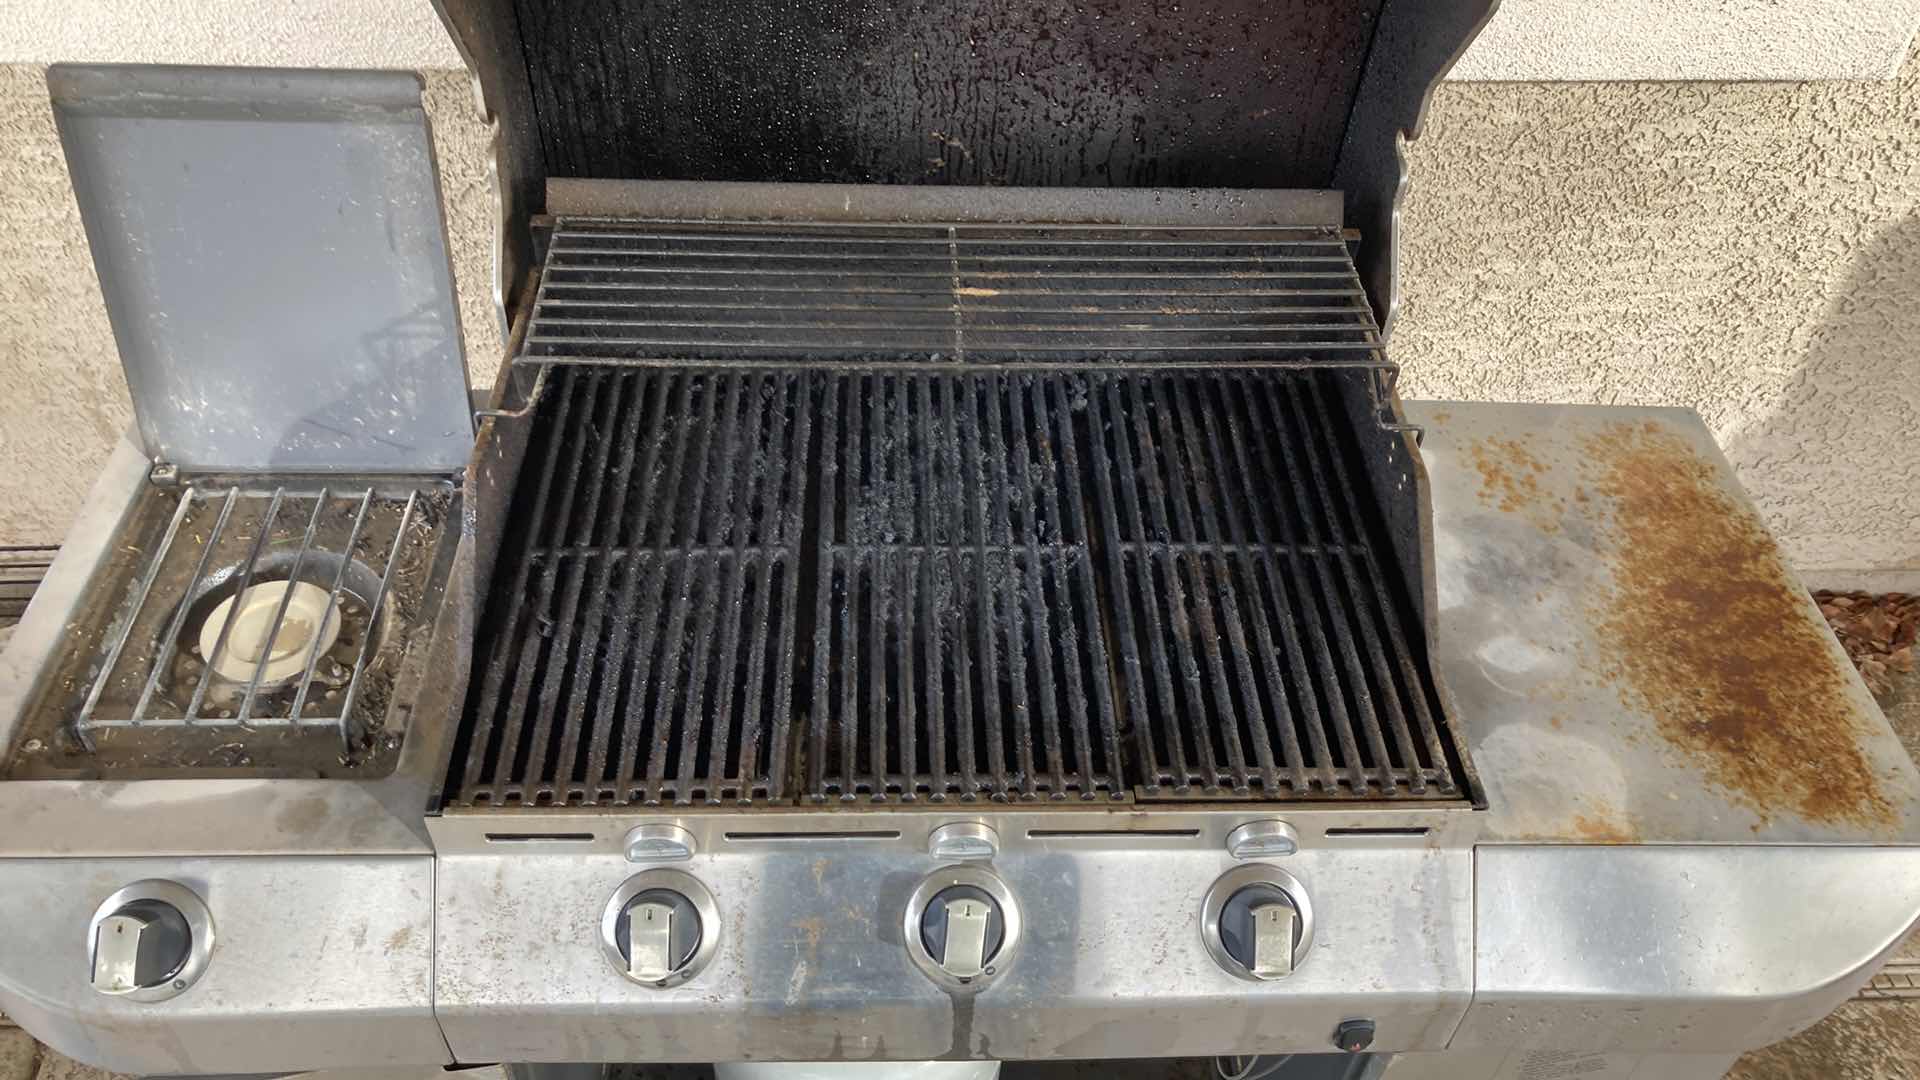 Photo 5 of CHARBROIL COMMERCIAL INFRARED PROPANE GRILL MODEL 463257111 W PROPANE TANK (PARTIALLY FULL)